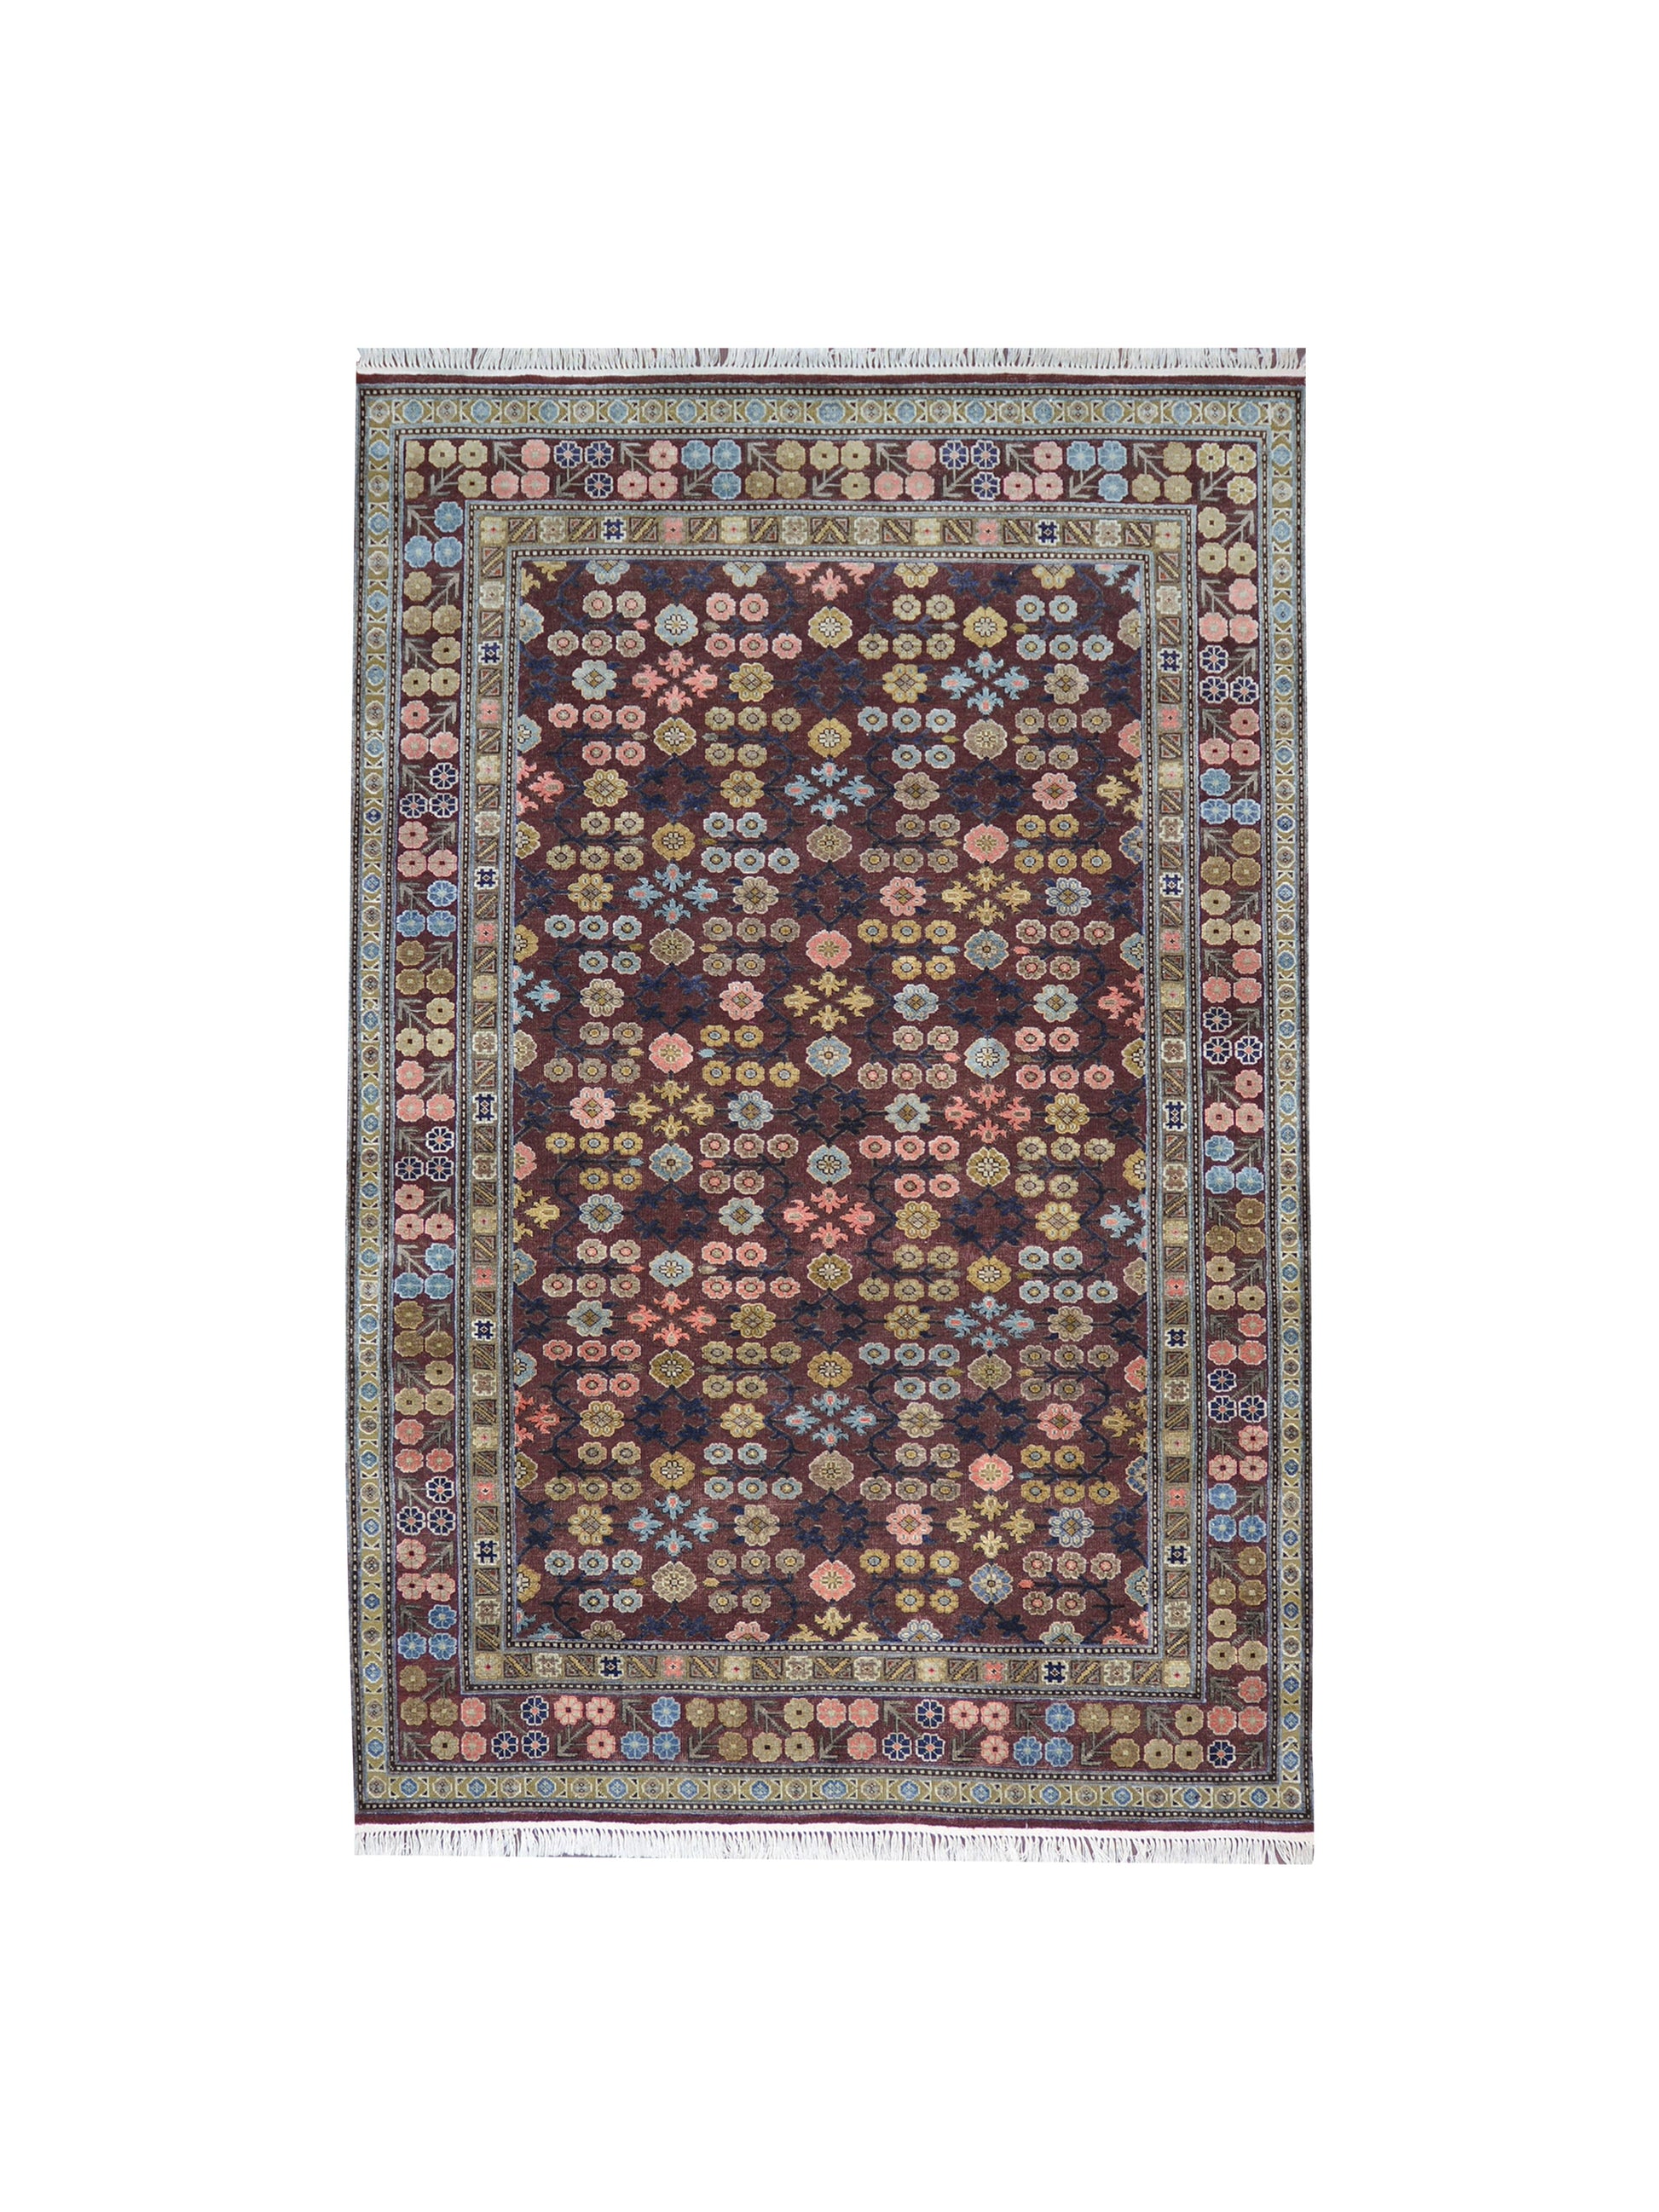 Get trendy with Red and Multy Silk Wool Handknotted Area Rug 5.11x9.2ft 180x279Cms - Traditional Rugs available at Jaipur Oriental Rugs. Grab yours for $2930.00 today!